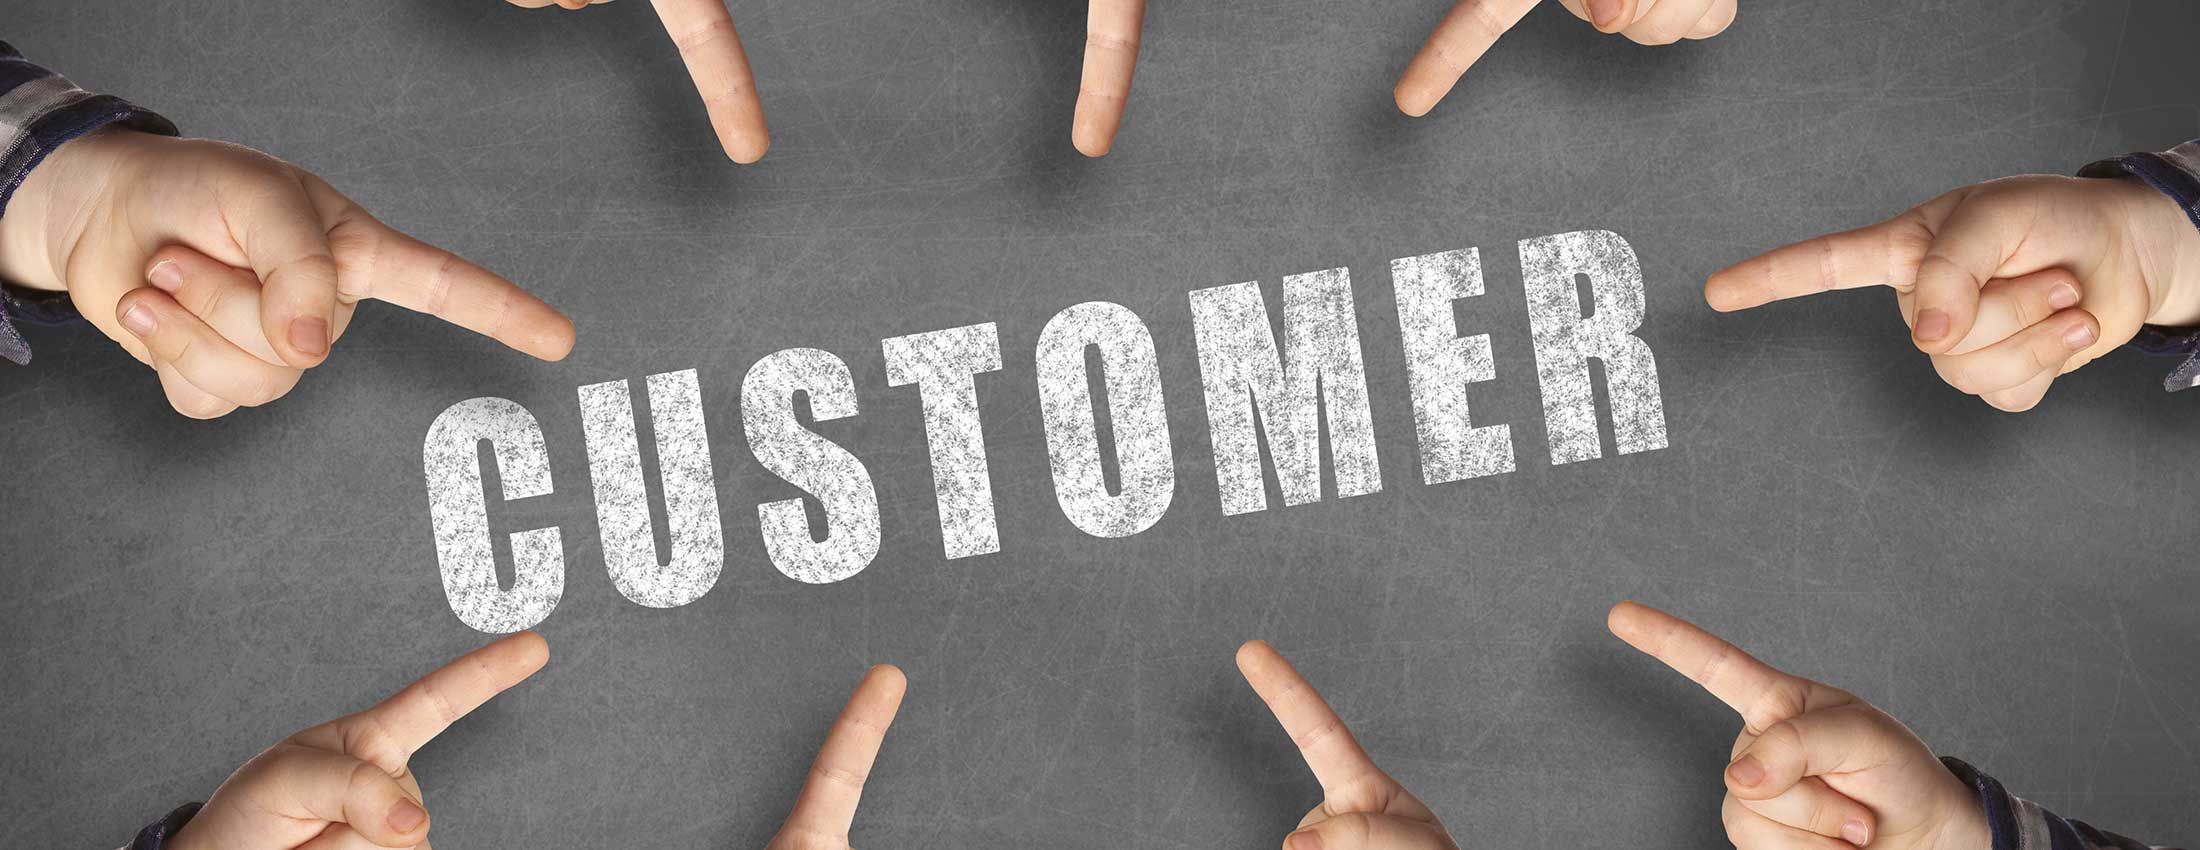 Customers first. Customer rights. Customer first. Customer is the first. Customer success.